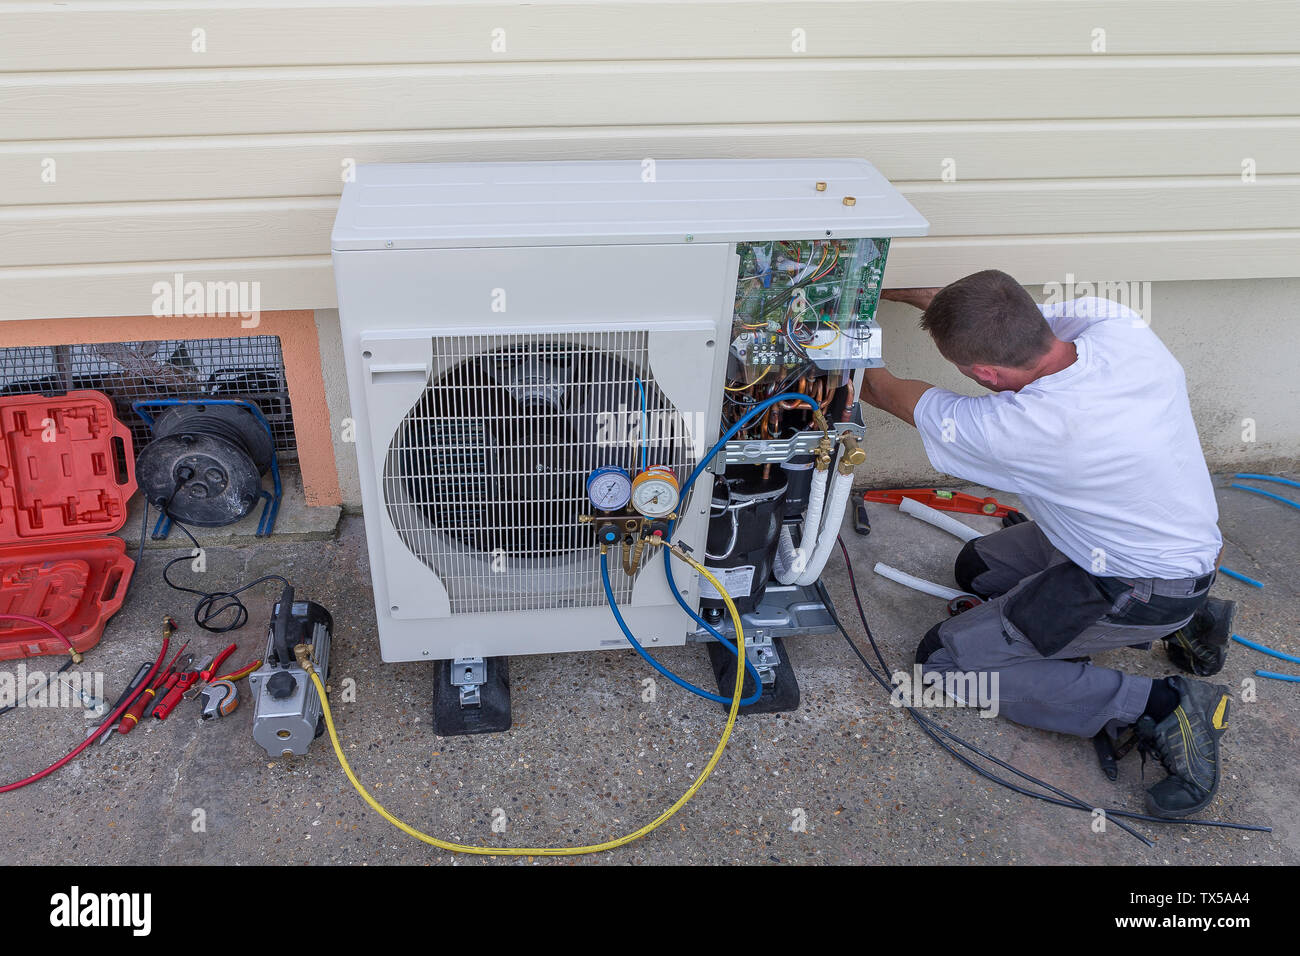 Heat Pump High Resolution Stock Photography and - Alamy